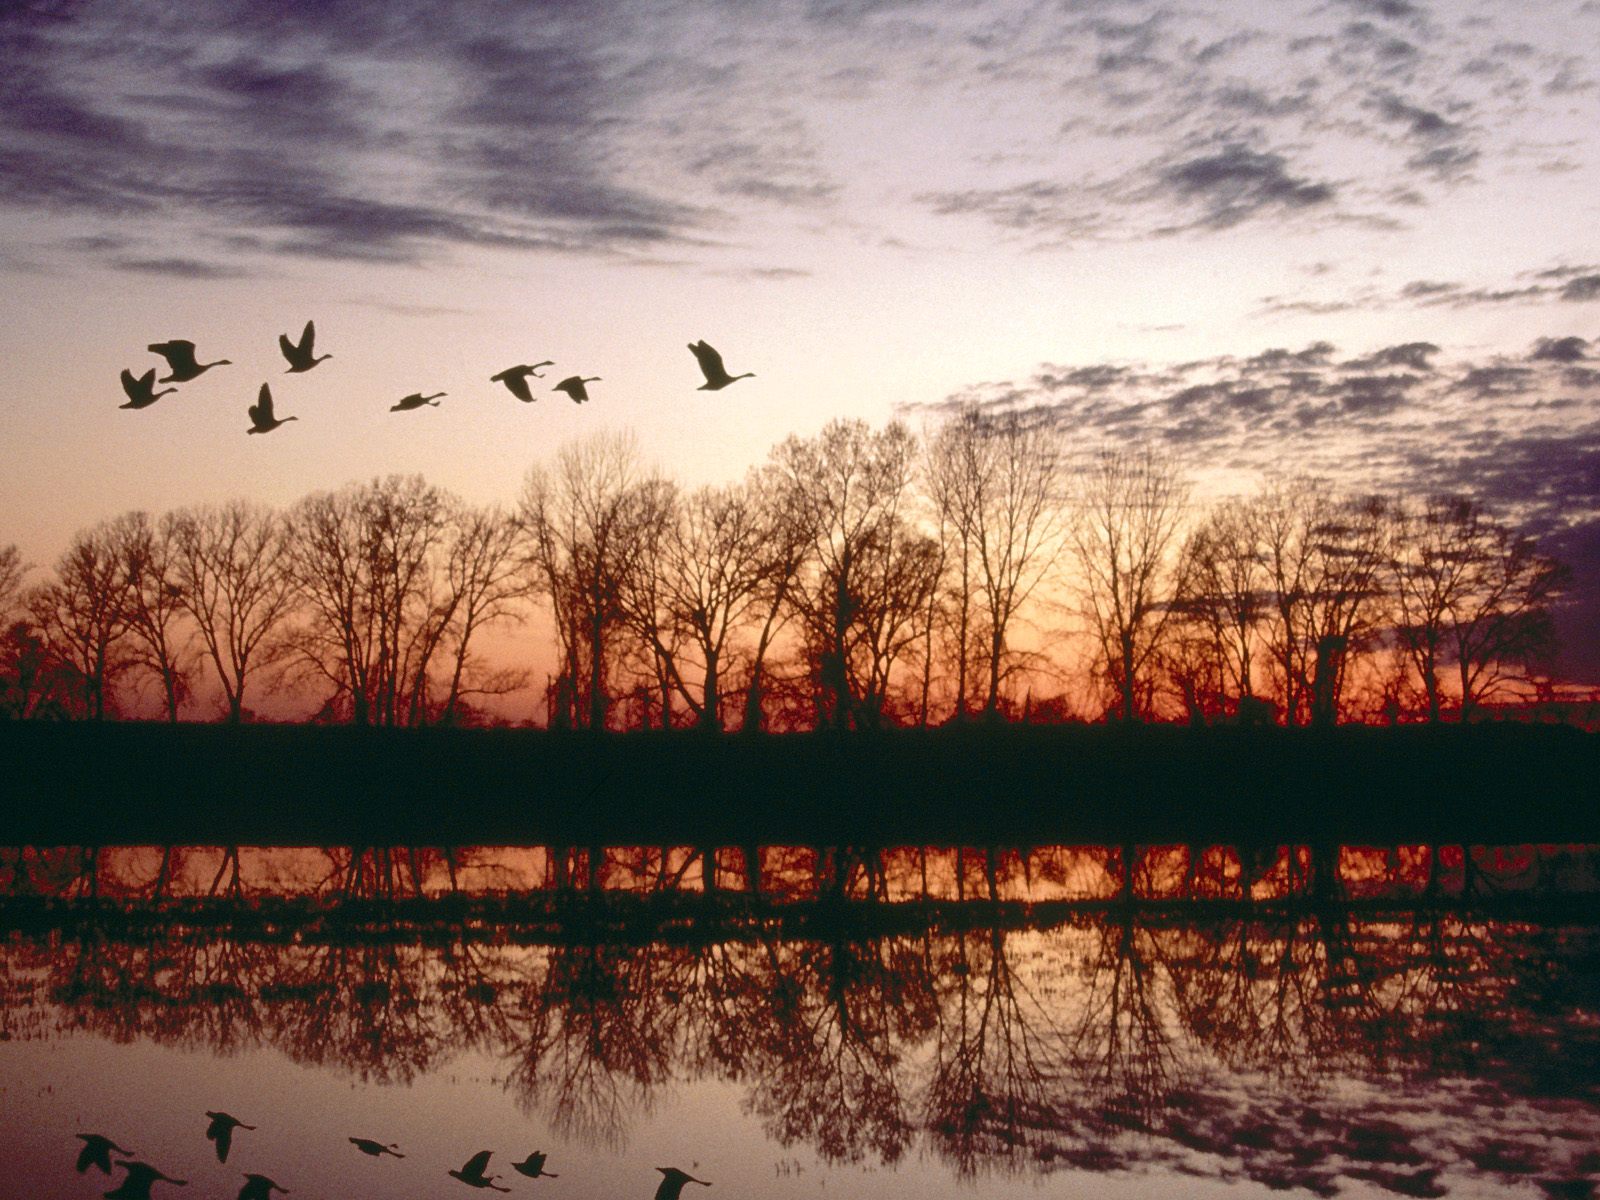  Geese Migrating Missouri Free Animals Wallpaper Image with Birds